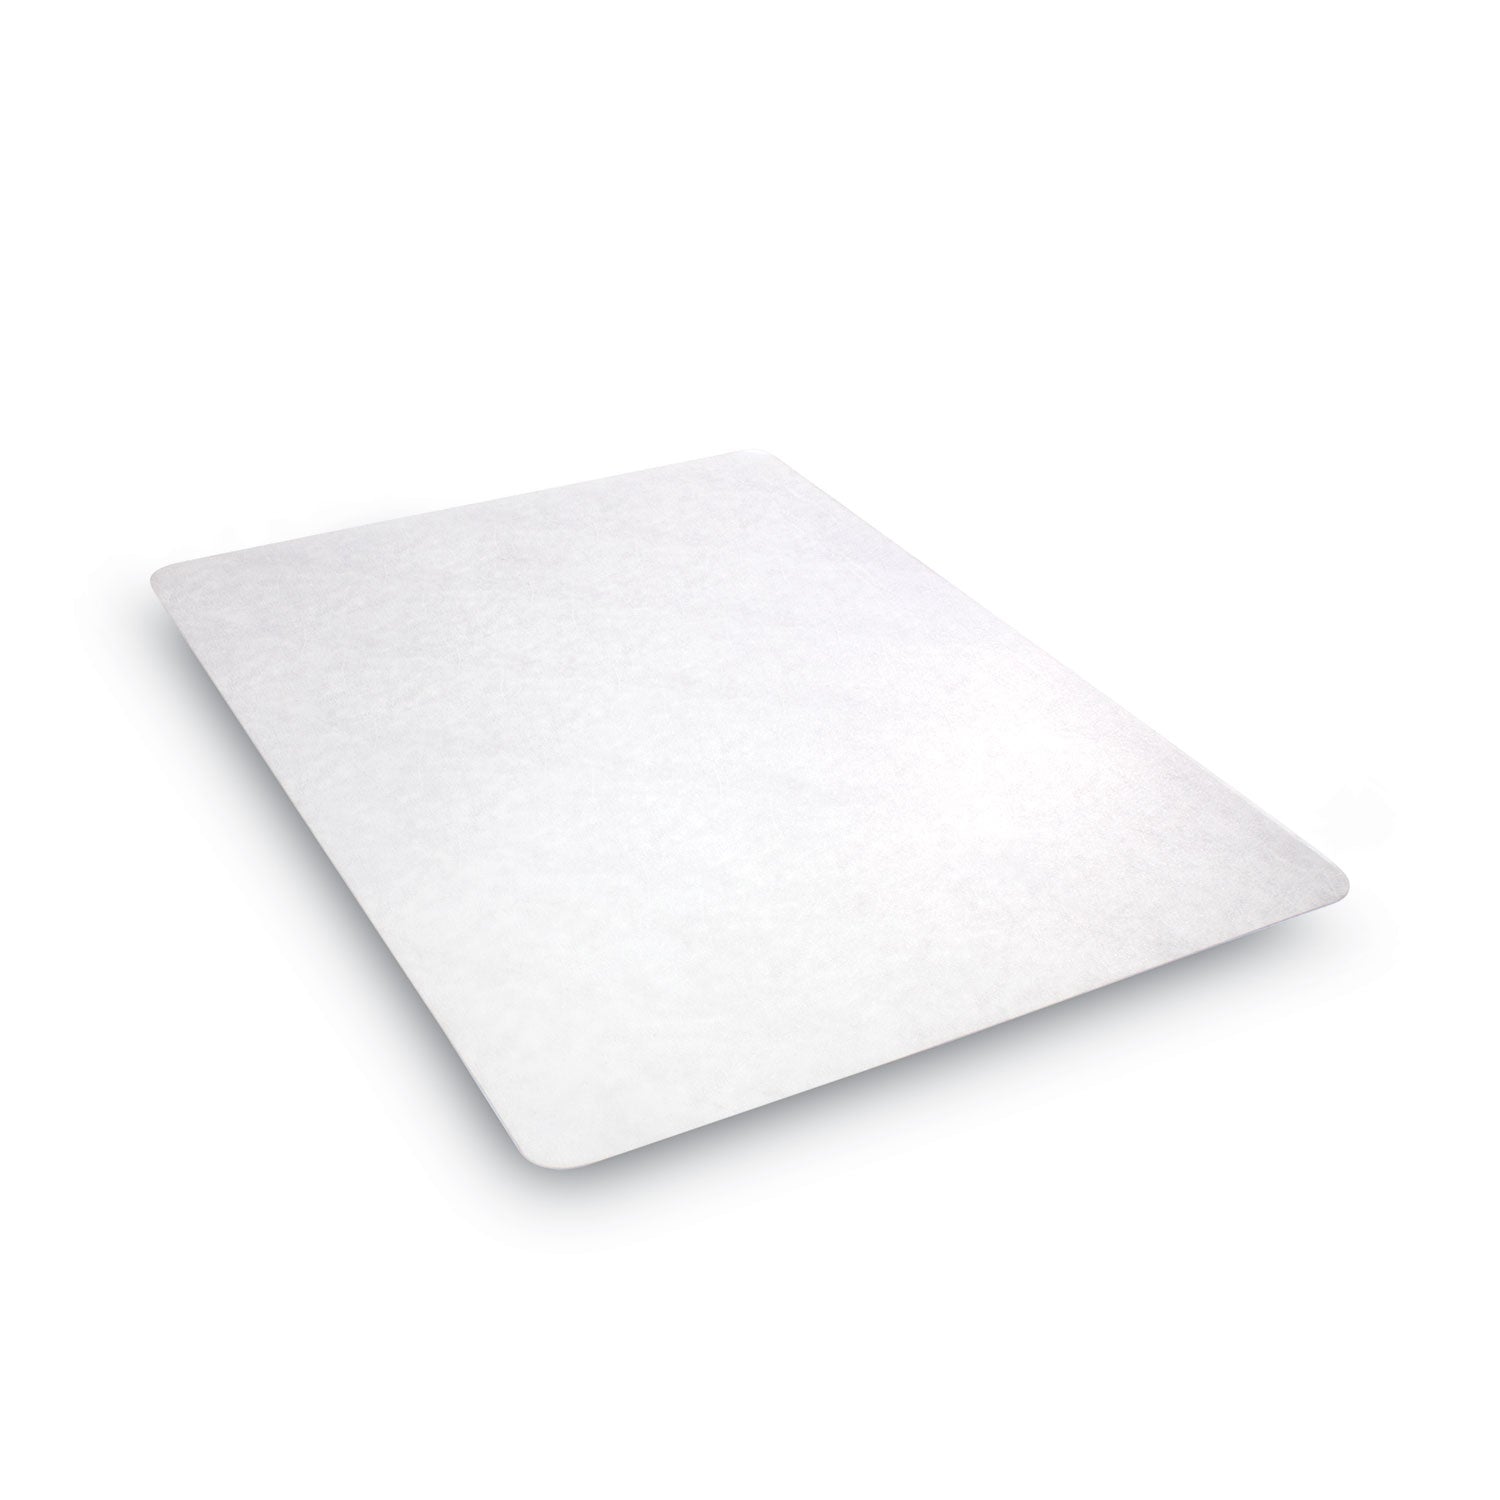 economat-all-day-use-chair-mat-for-hard-floors-rolled-packed-46-x-60-clear_defcm2e442fcom - 1